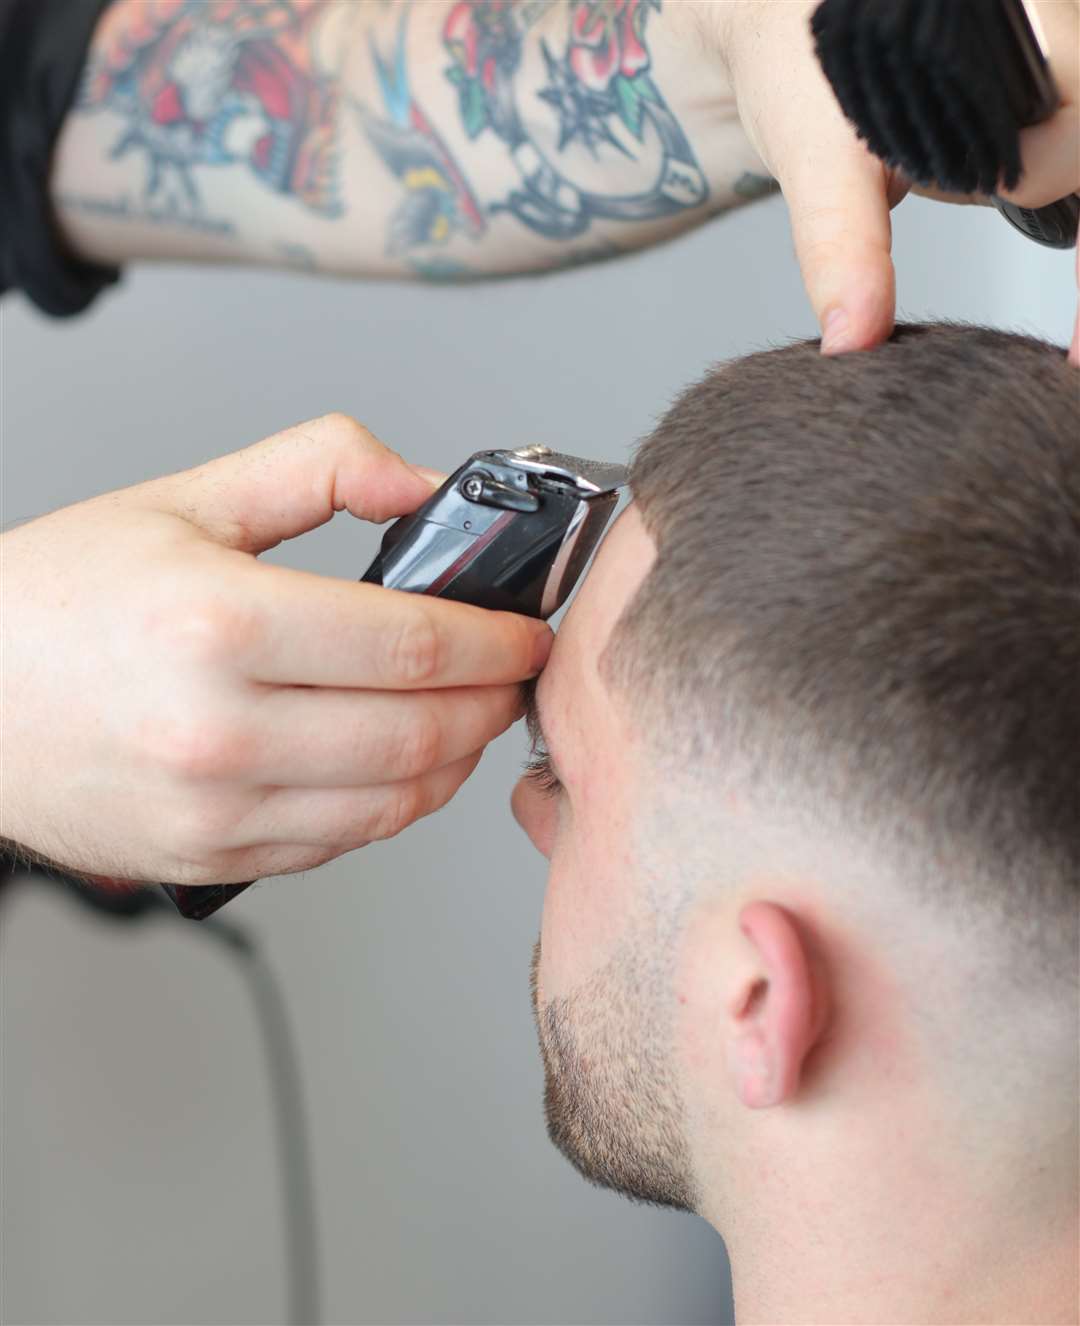 Jake Cox offers a range of cuts and treatments at his new barbershop focused on men's mental health. Photo: Bruce Middlemiss Photography